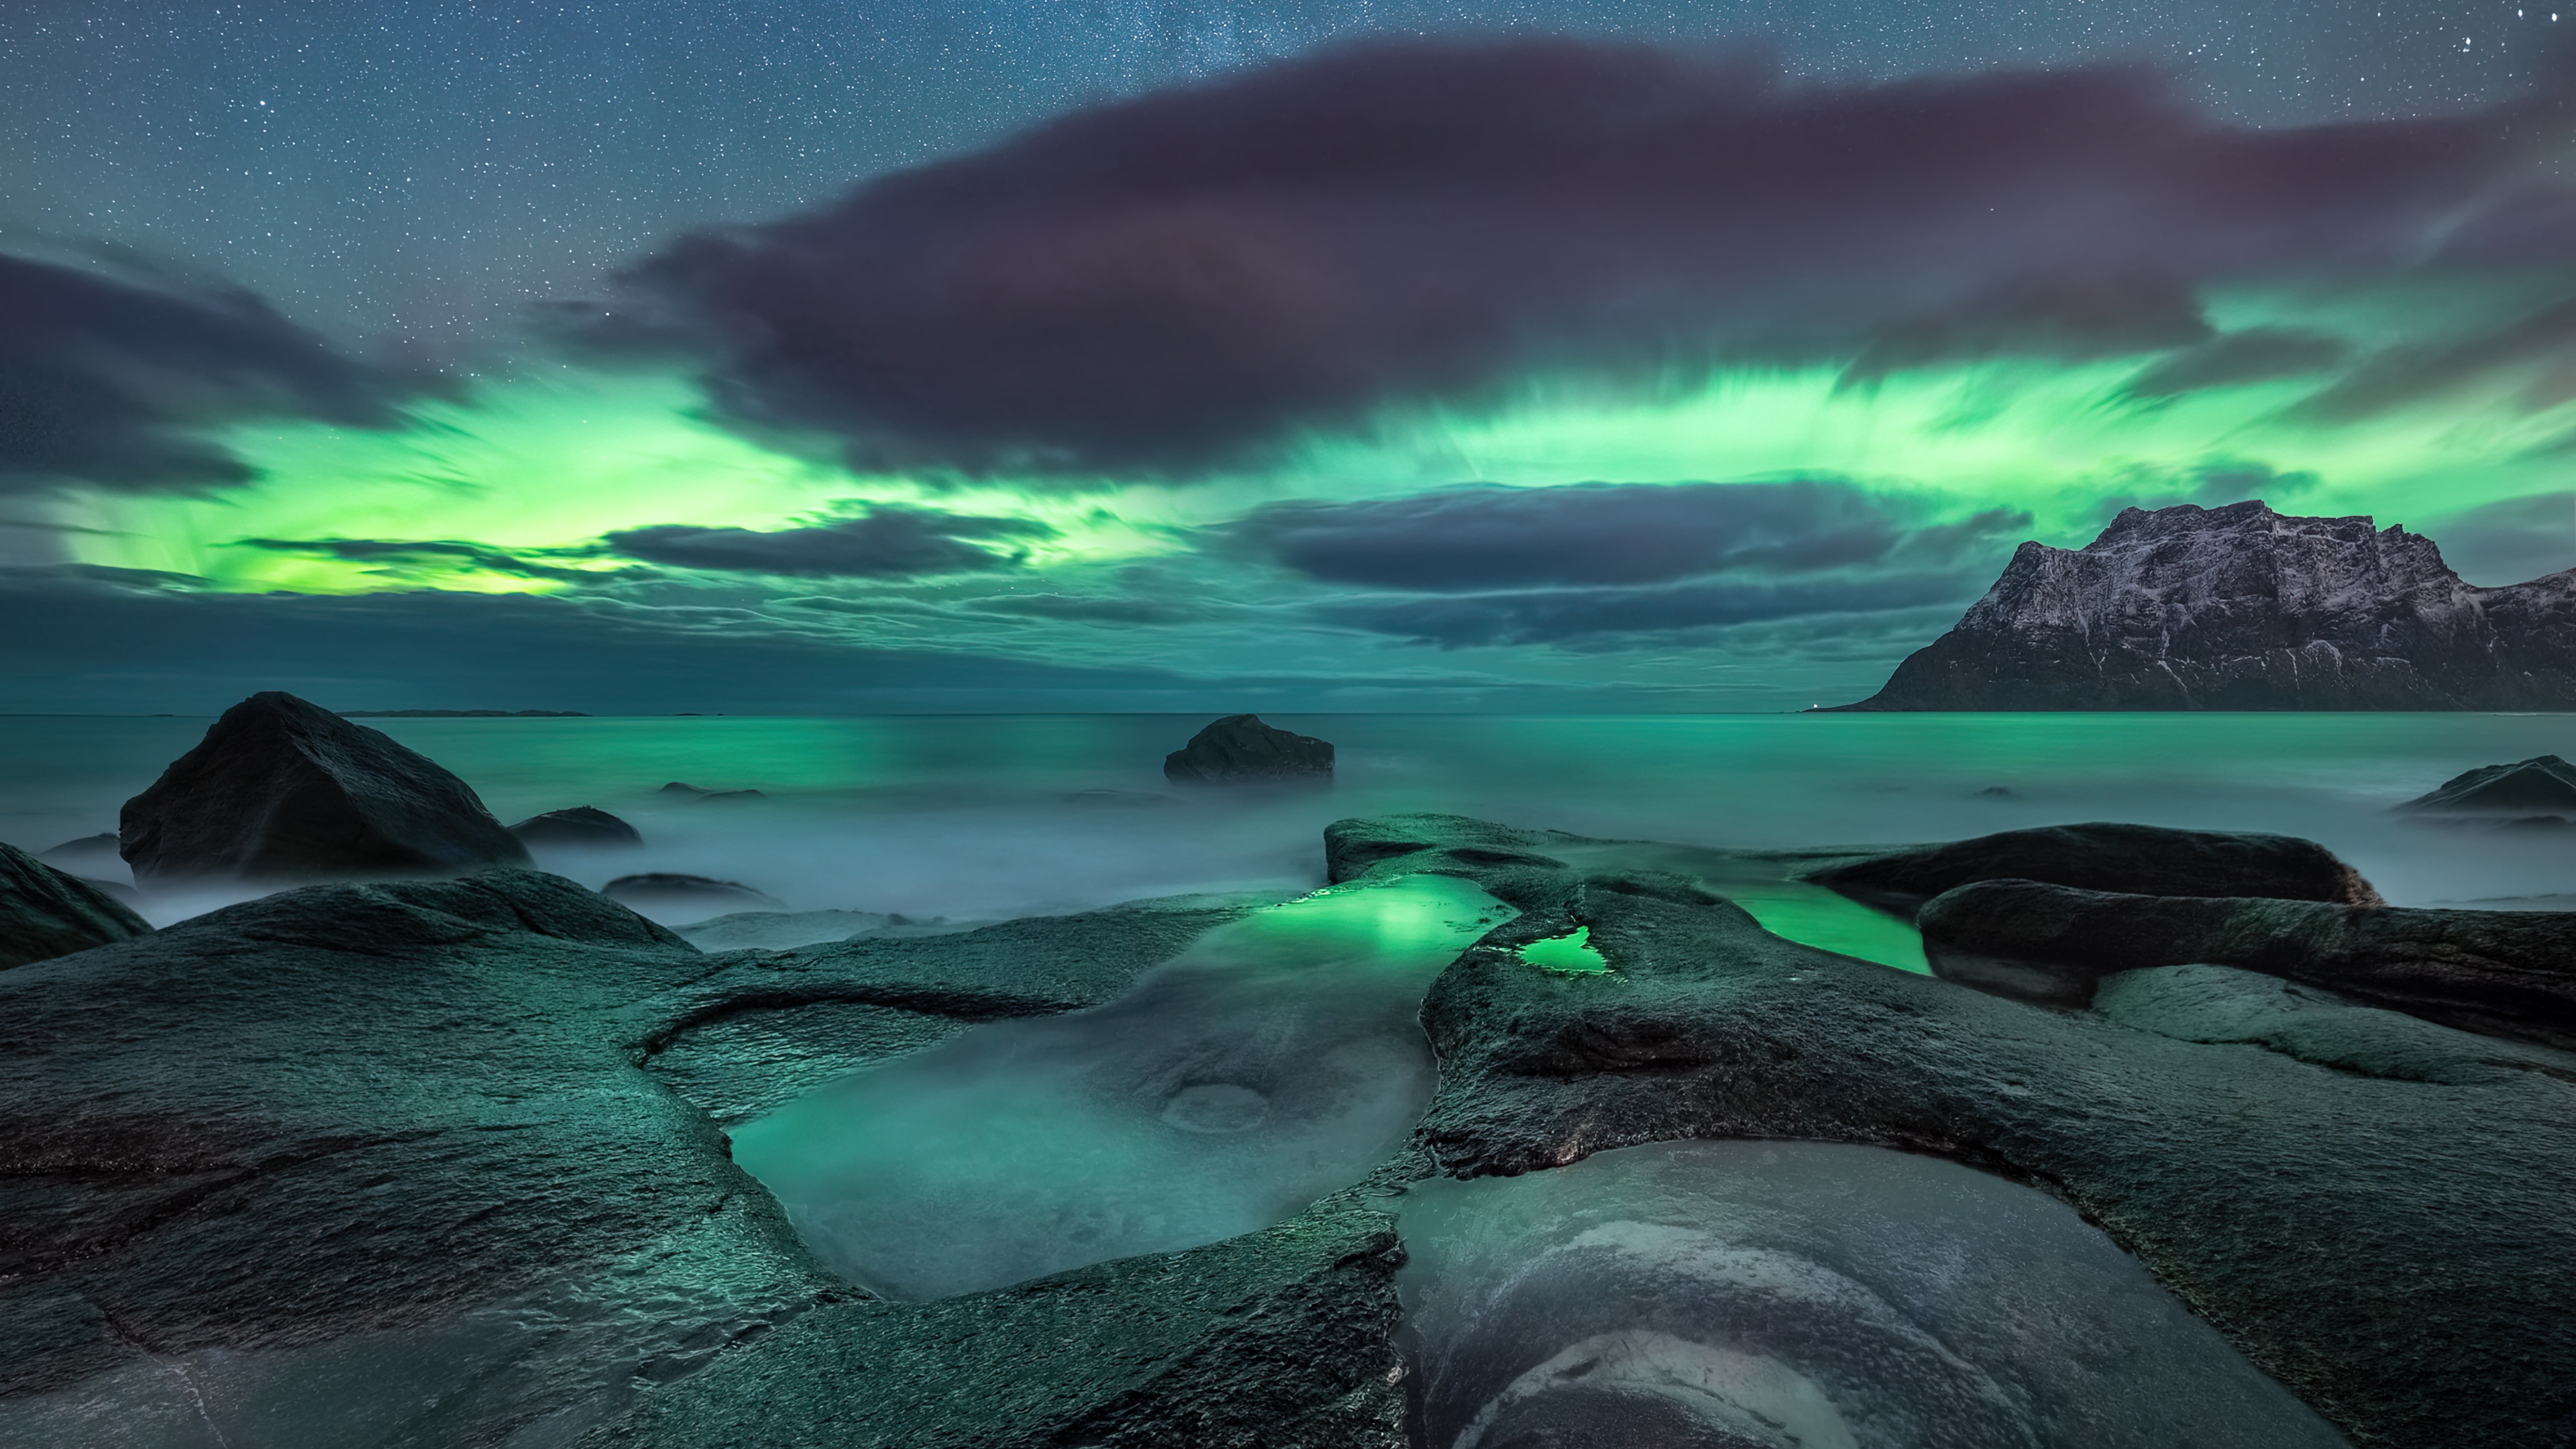 General 3840x2160 landscape photography sea water rocks rock formation mountains clouds long exposure low light aurorae stars sky night nature